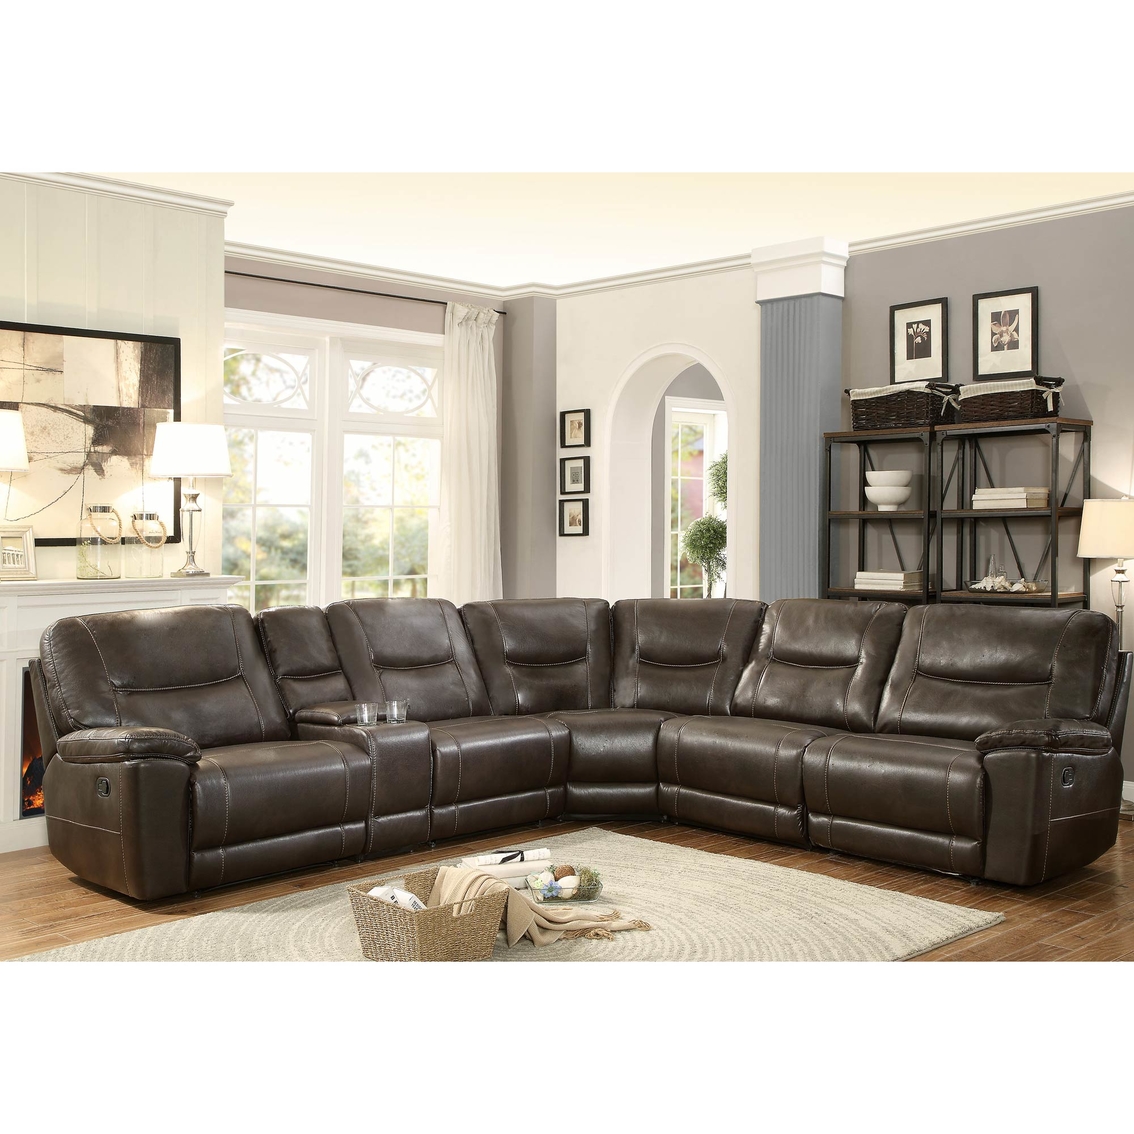 Homelegance Columbus 6 Pc. Reclining Sectional | Sofas & Couches ...